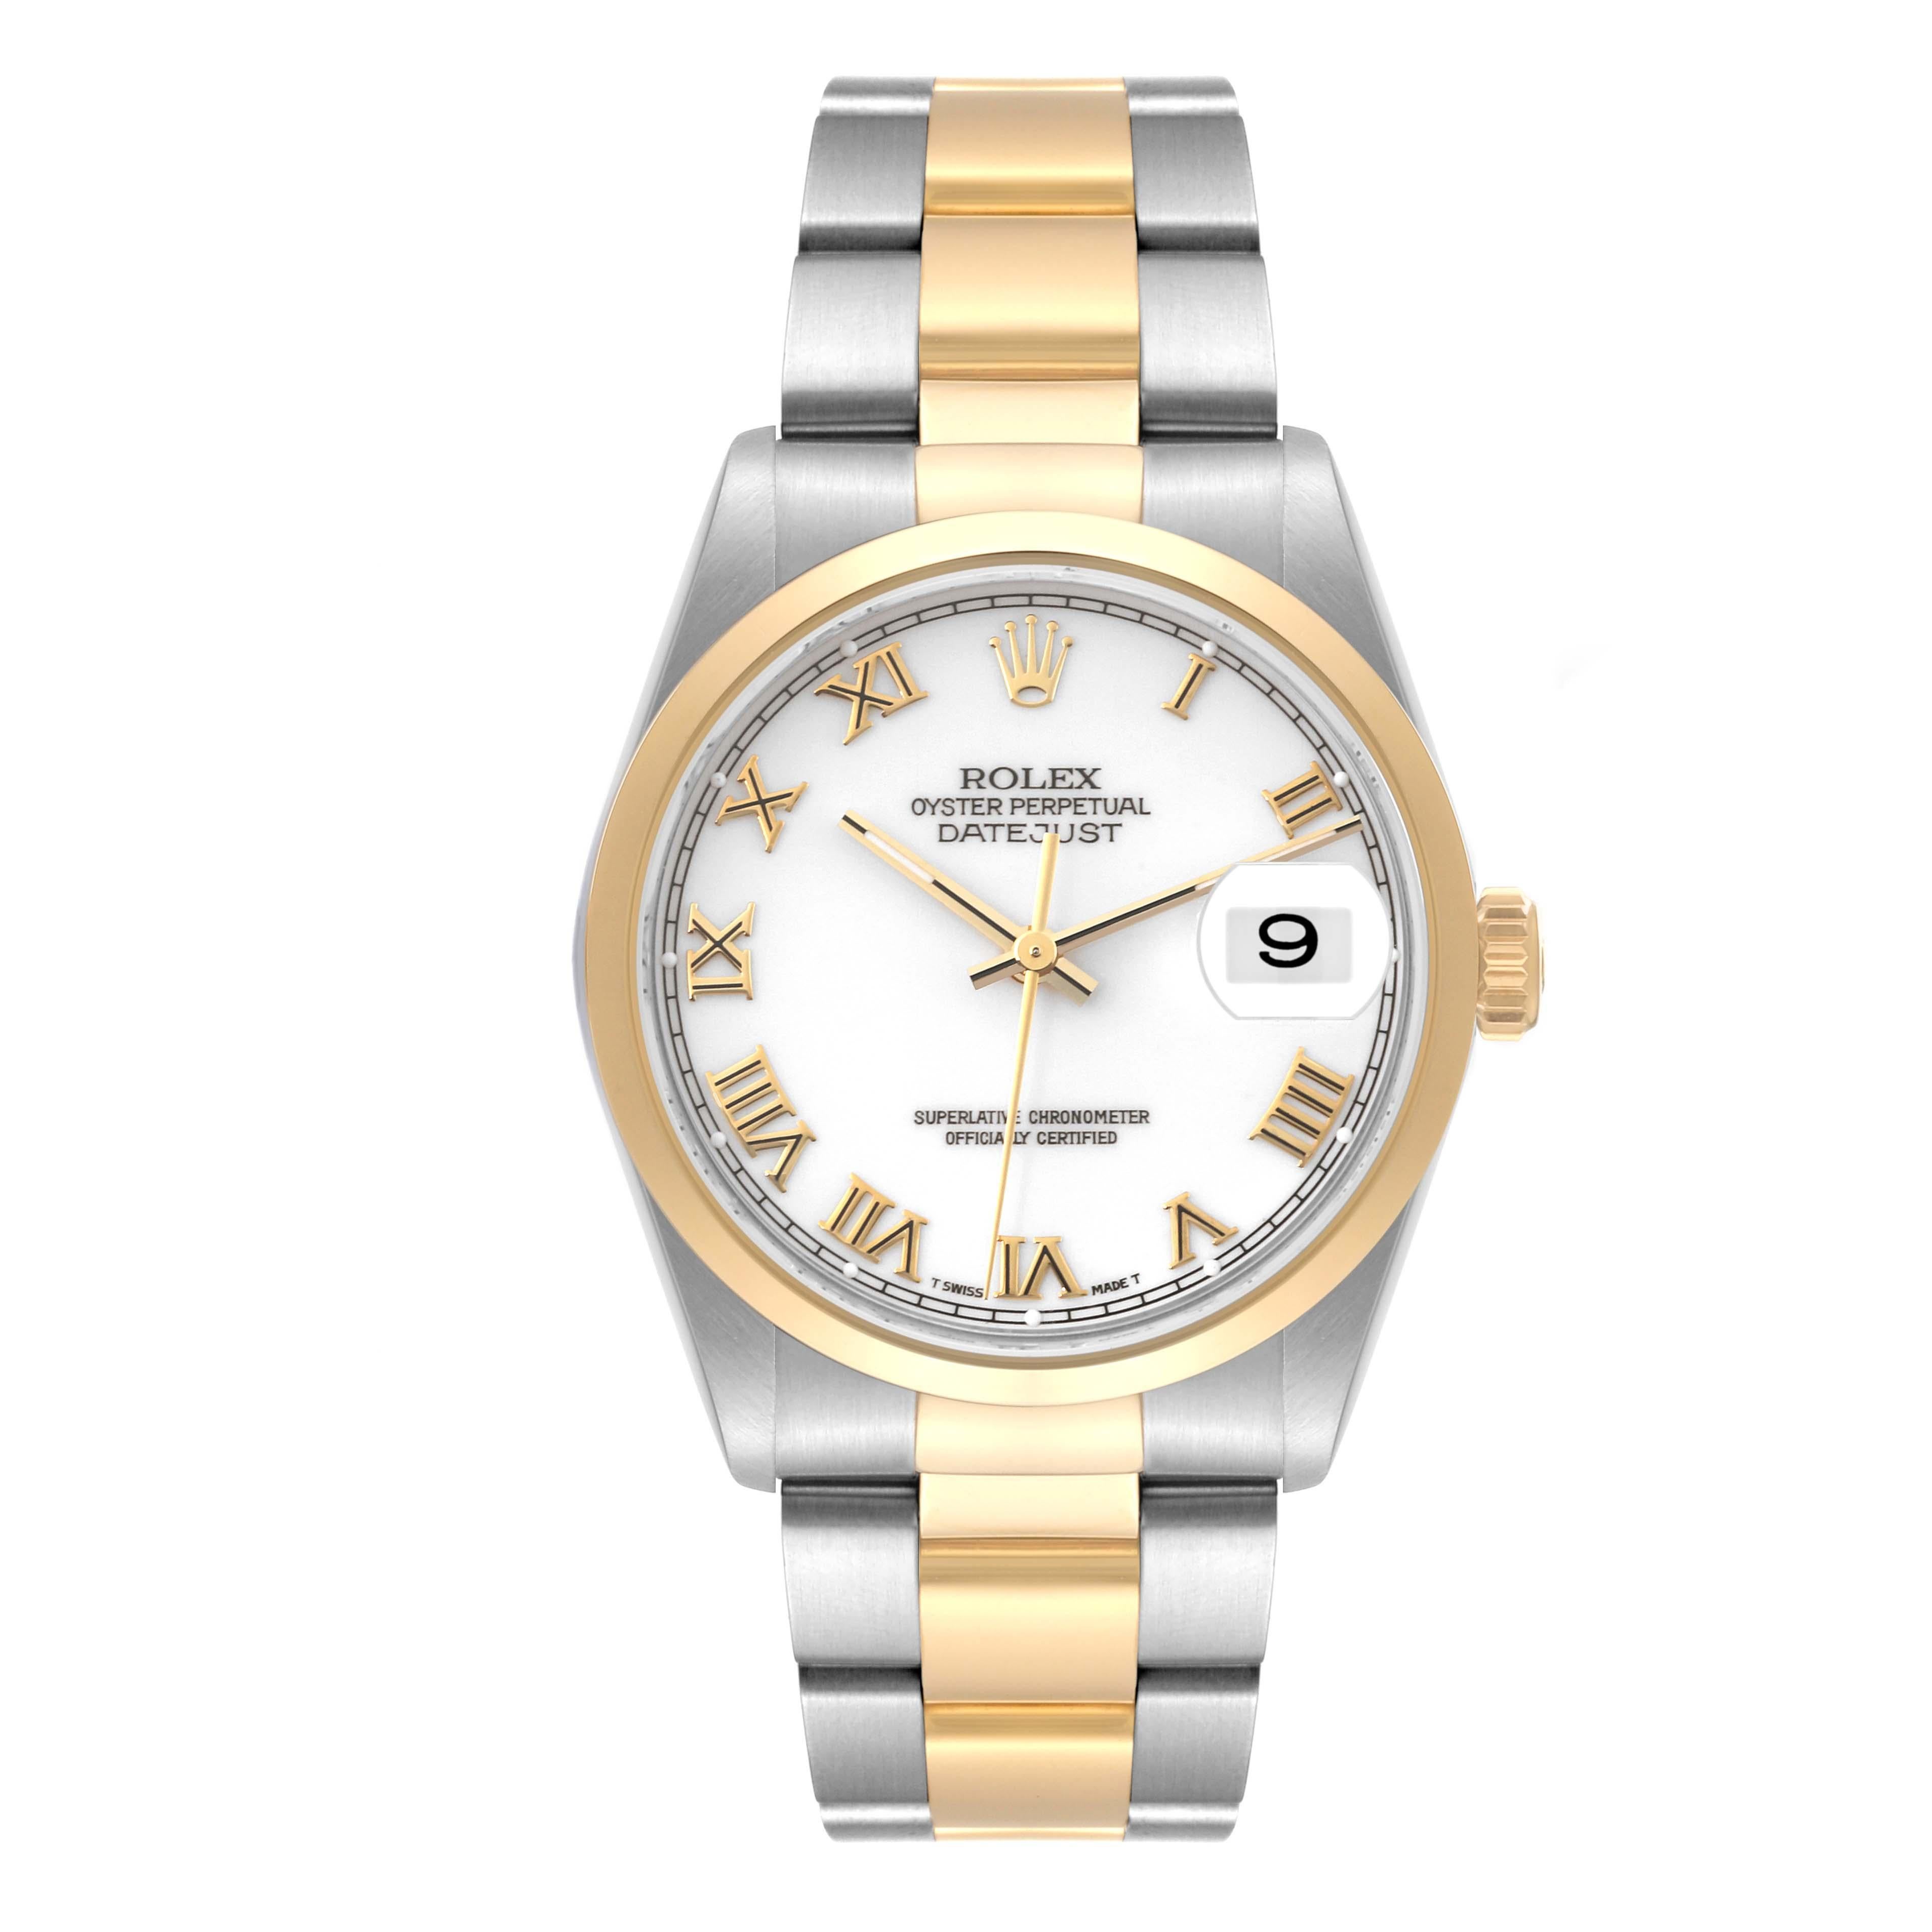 Rolex Datejust Steel Yellow Gold White Dial Mens Watch 16203 Box Papers. Officially certified chronometer automatic self-winding movement. Stainless steel case 36 mm in diameter. Rolex logo on an 18K yellow gold crown. 18k yellow gold smooth bezel.